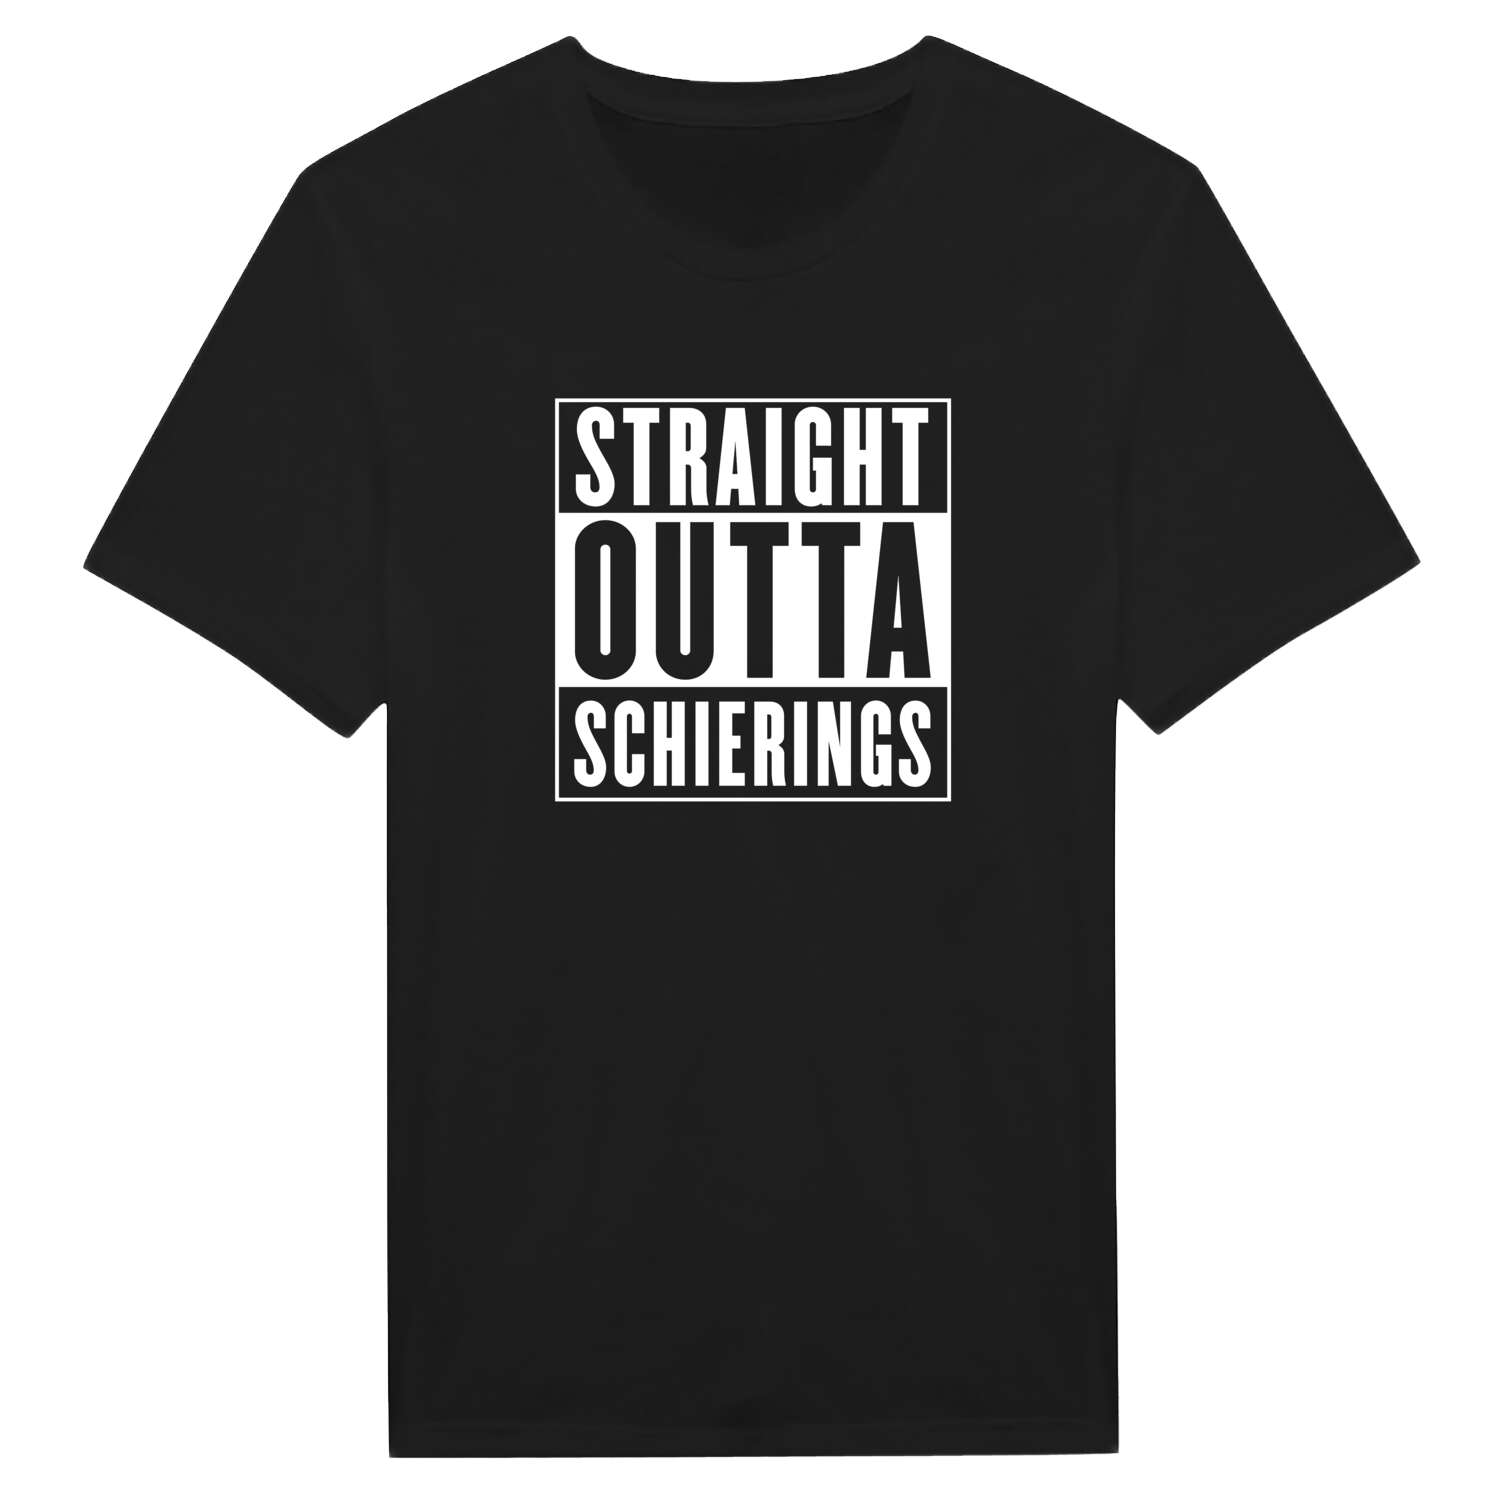 Schierings T-Shirt »Straight Outta«